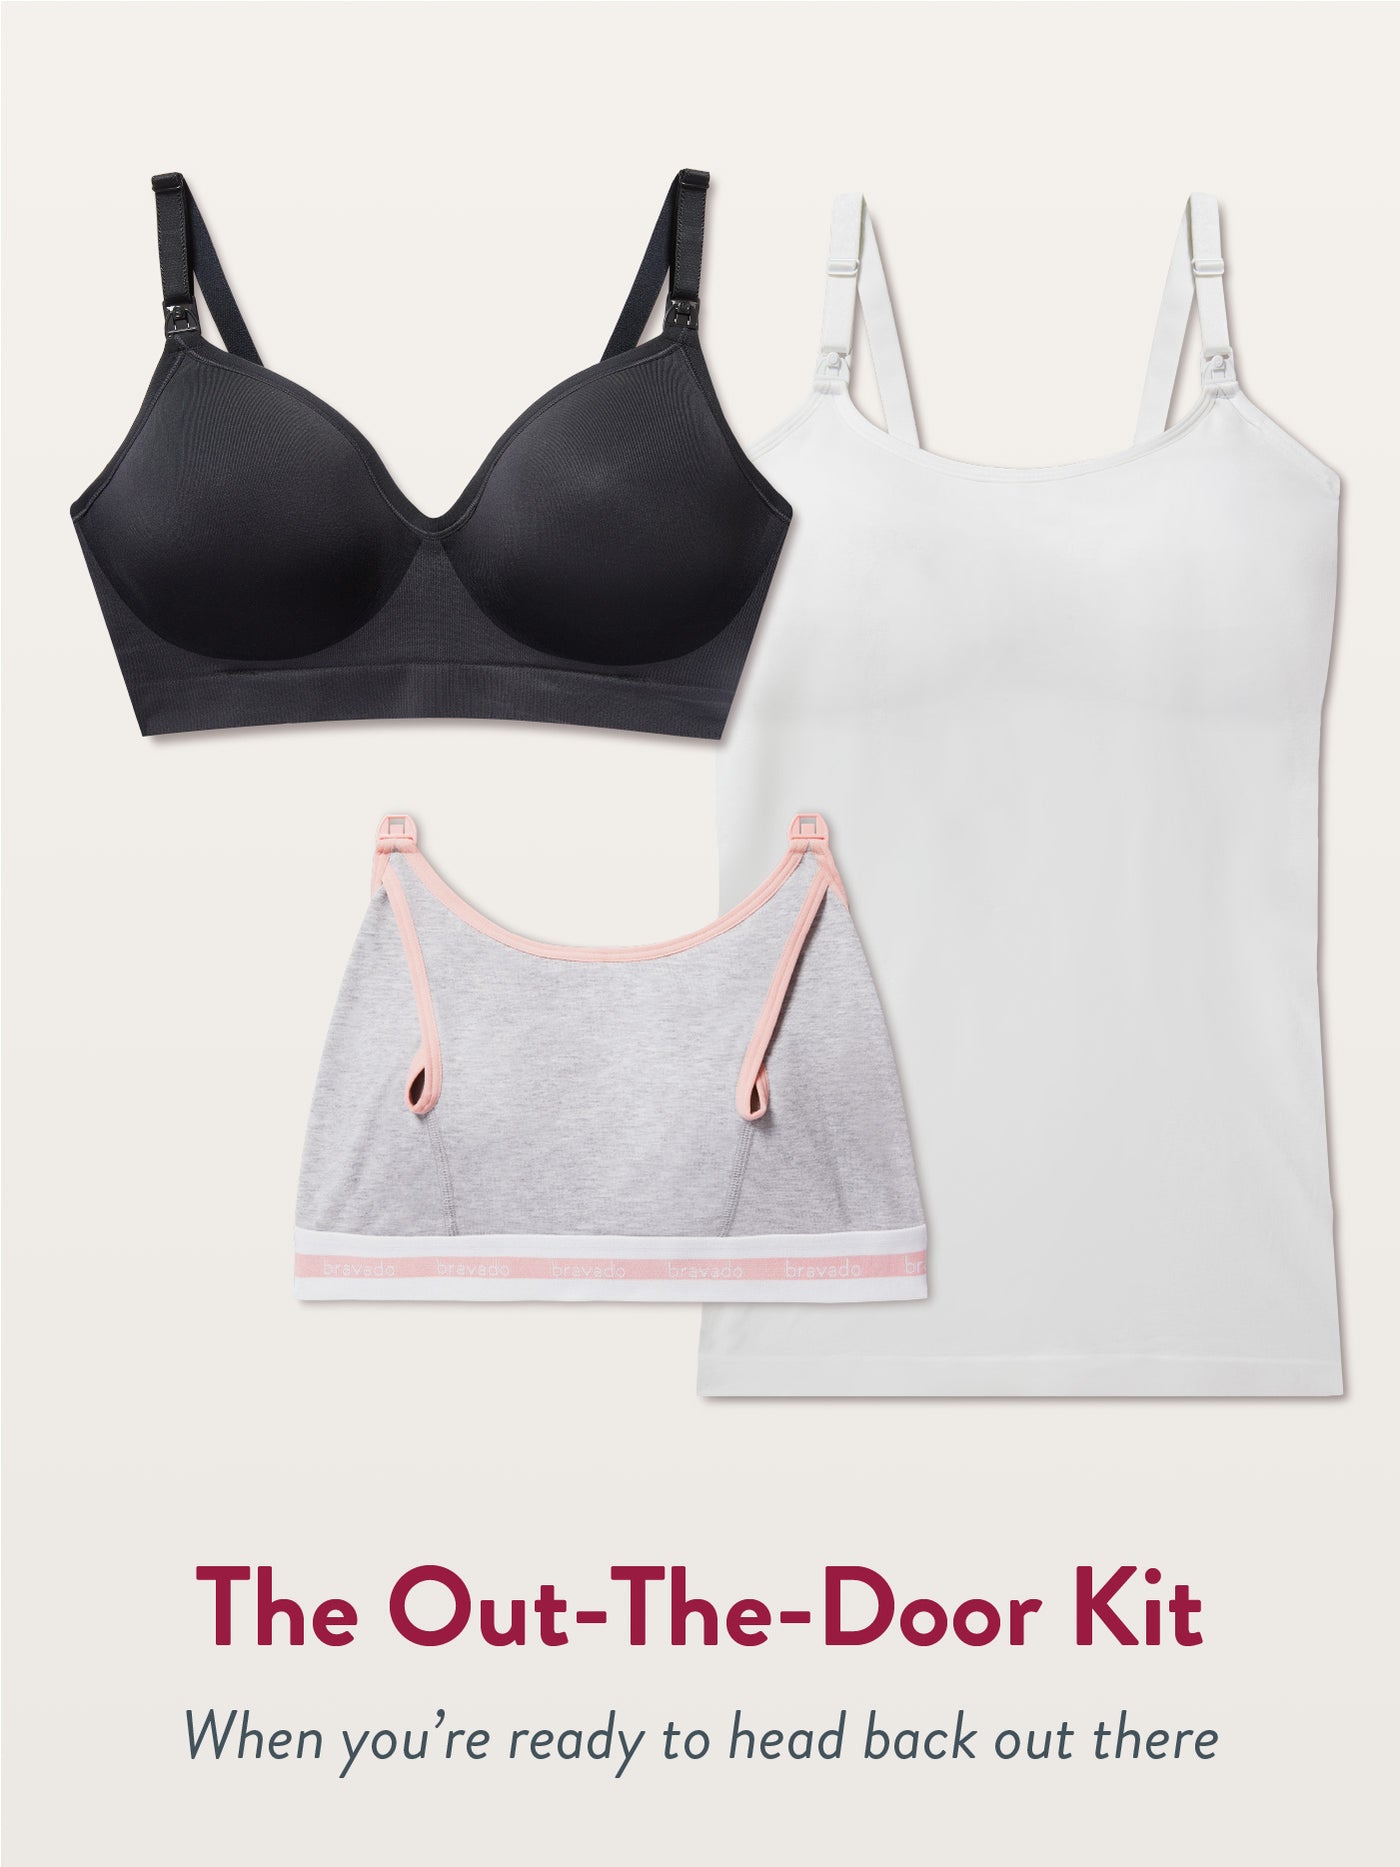 The Out-The-Door Kit